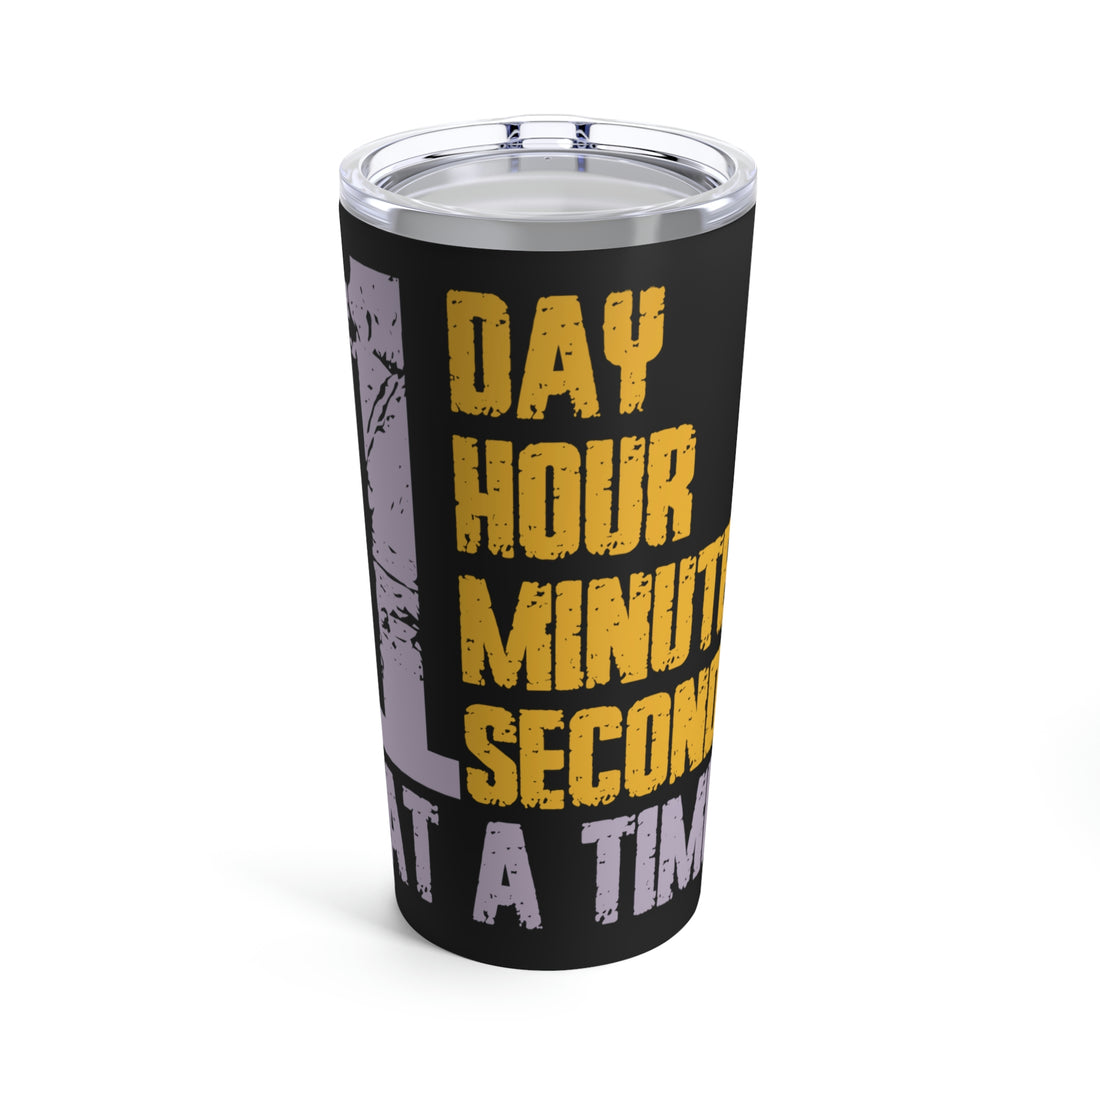 1 Day Hour Minute Second At A Time - Black Tumbler 20oz